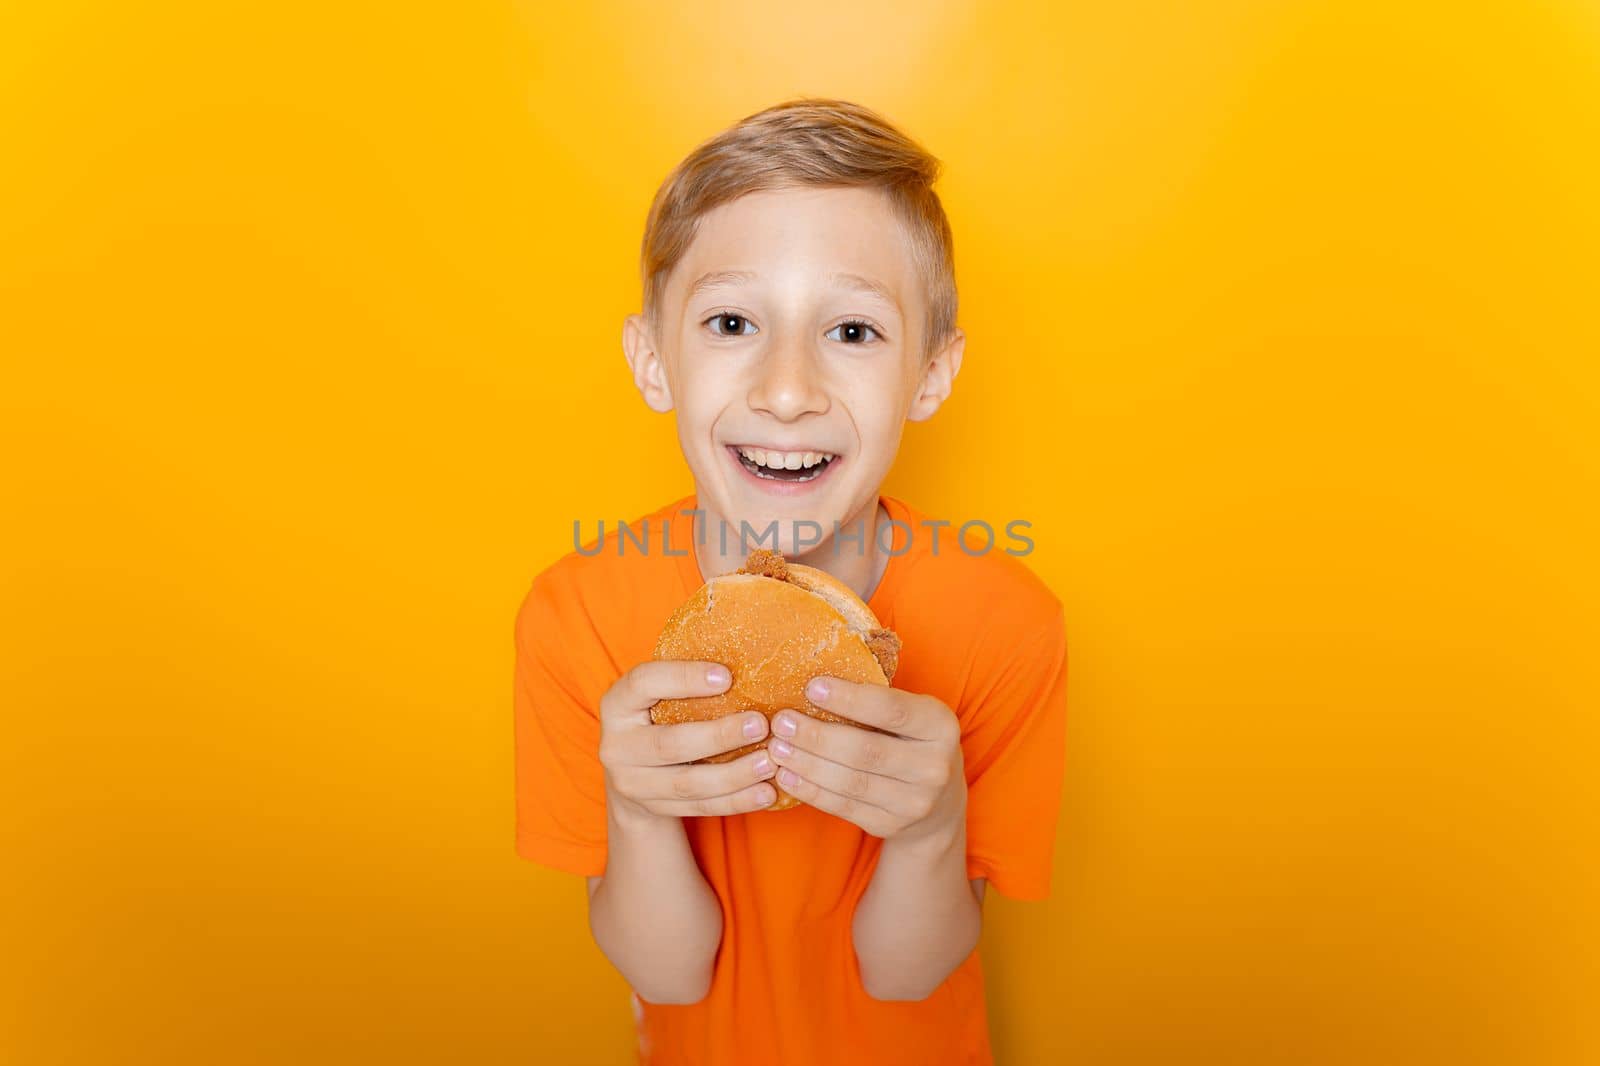 a boy in an orange T-shirt holds a hamburger in front of him and laughs loudly against a yellow background